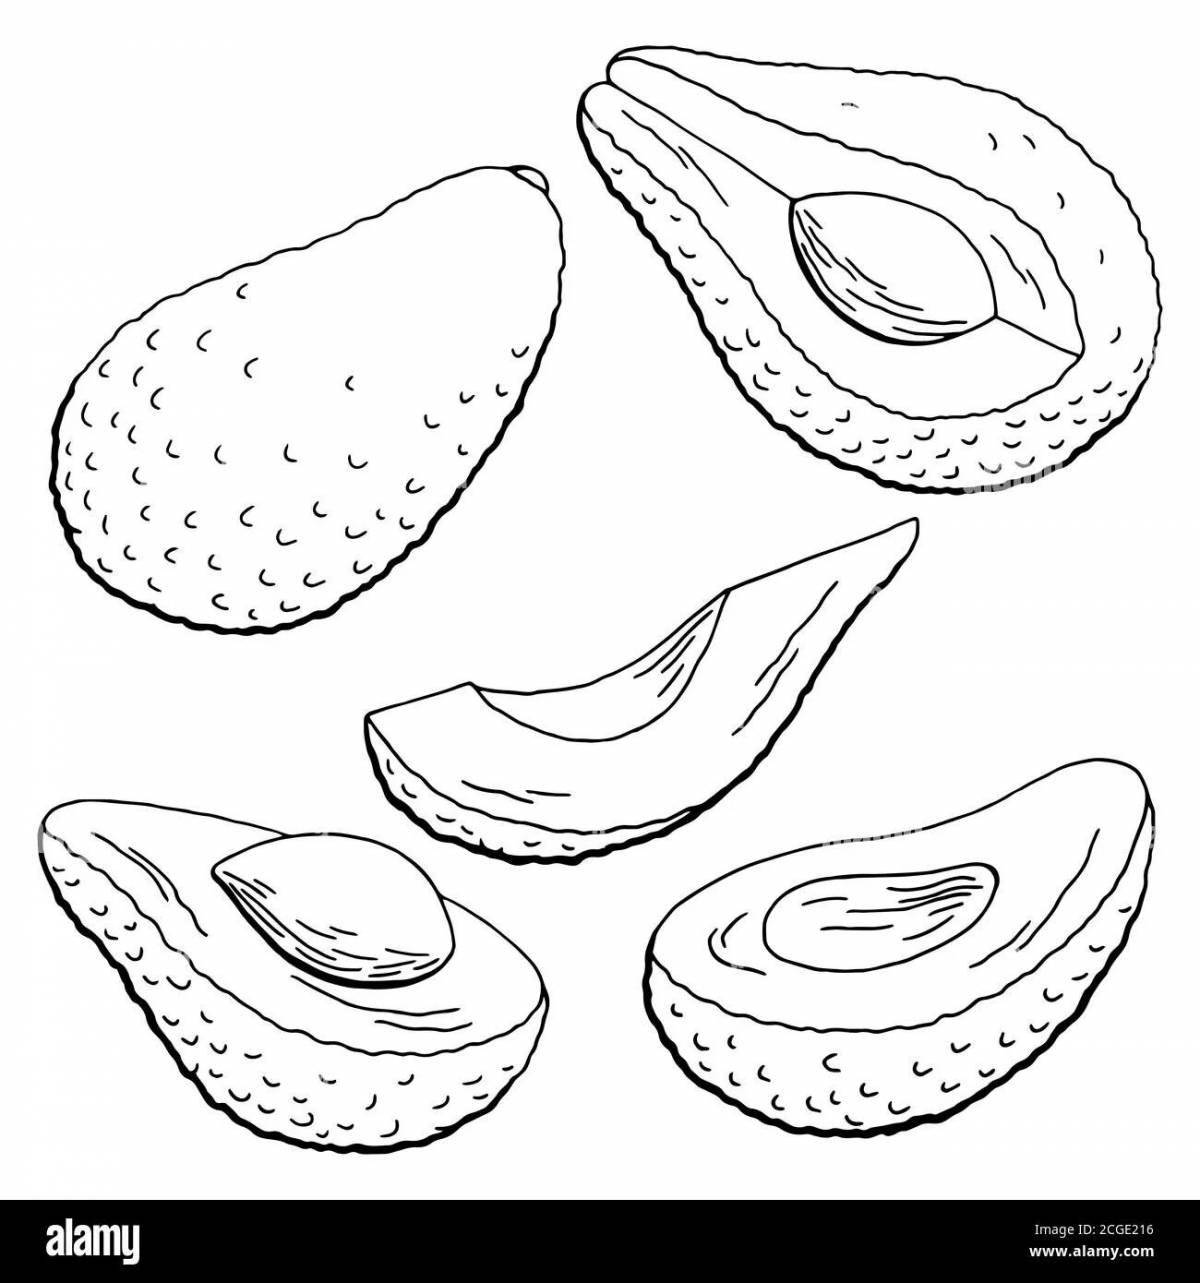 Avocado coloring book for 6-7 year olds